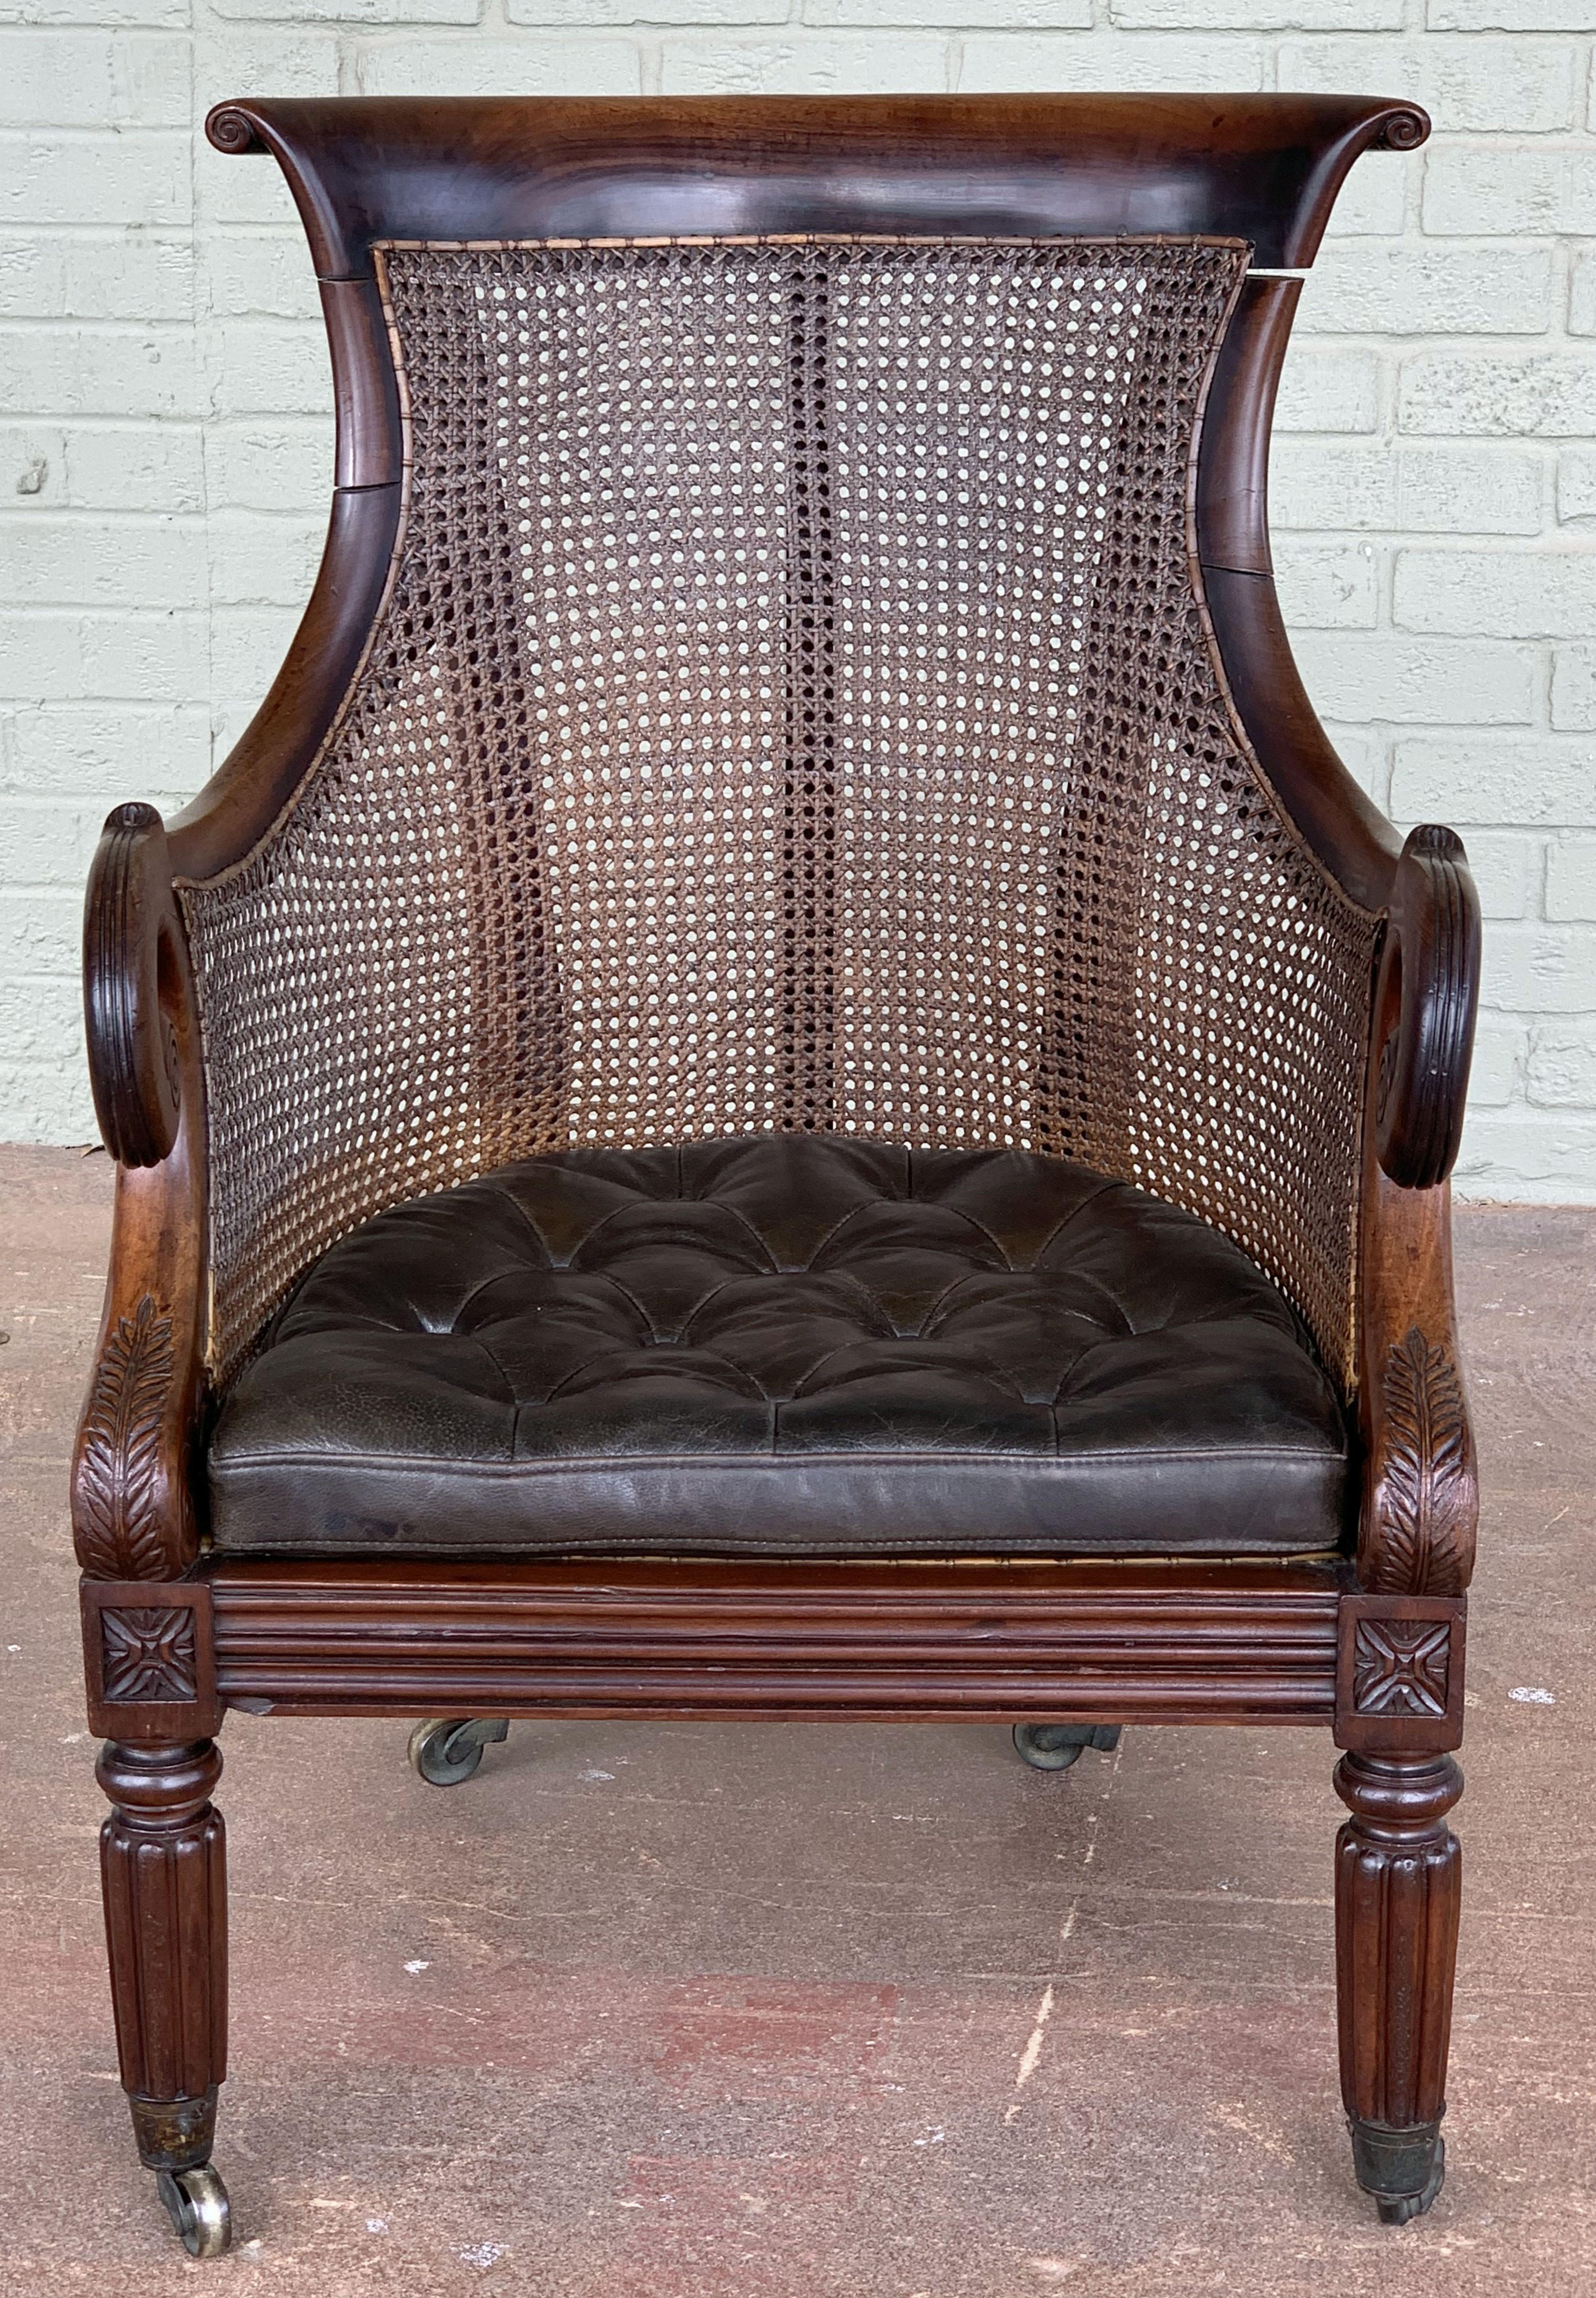 Turned English Bergere Armchair of Caned Mahogany from the Regency Period